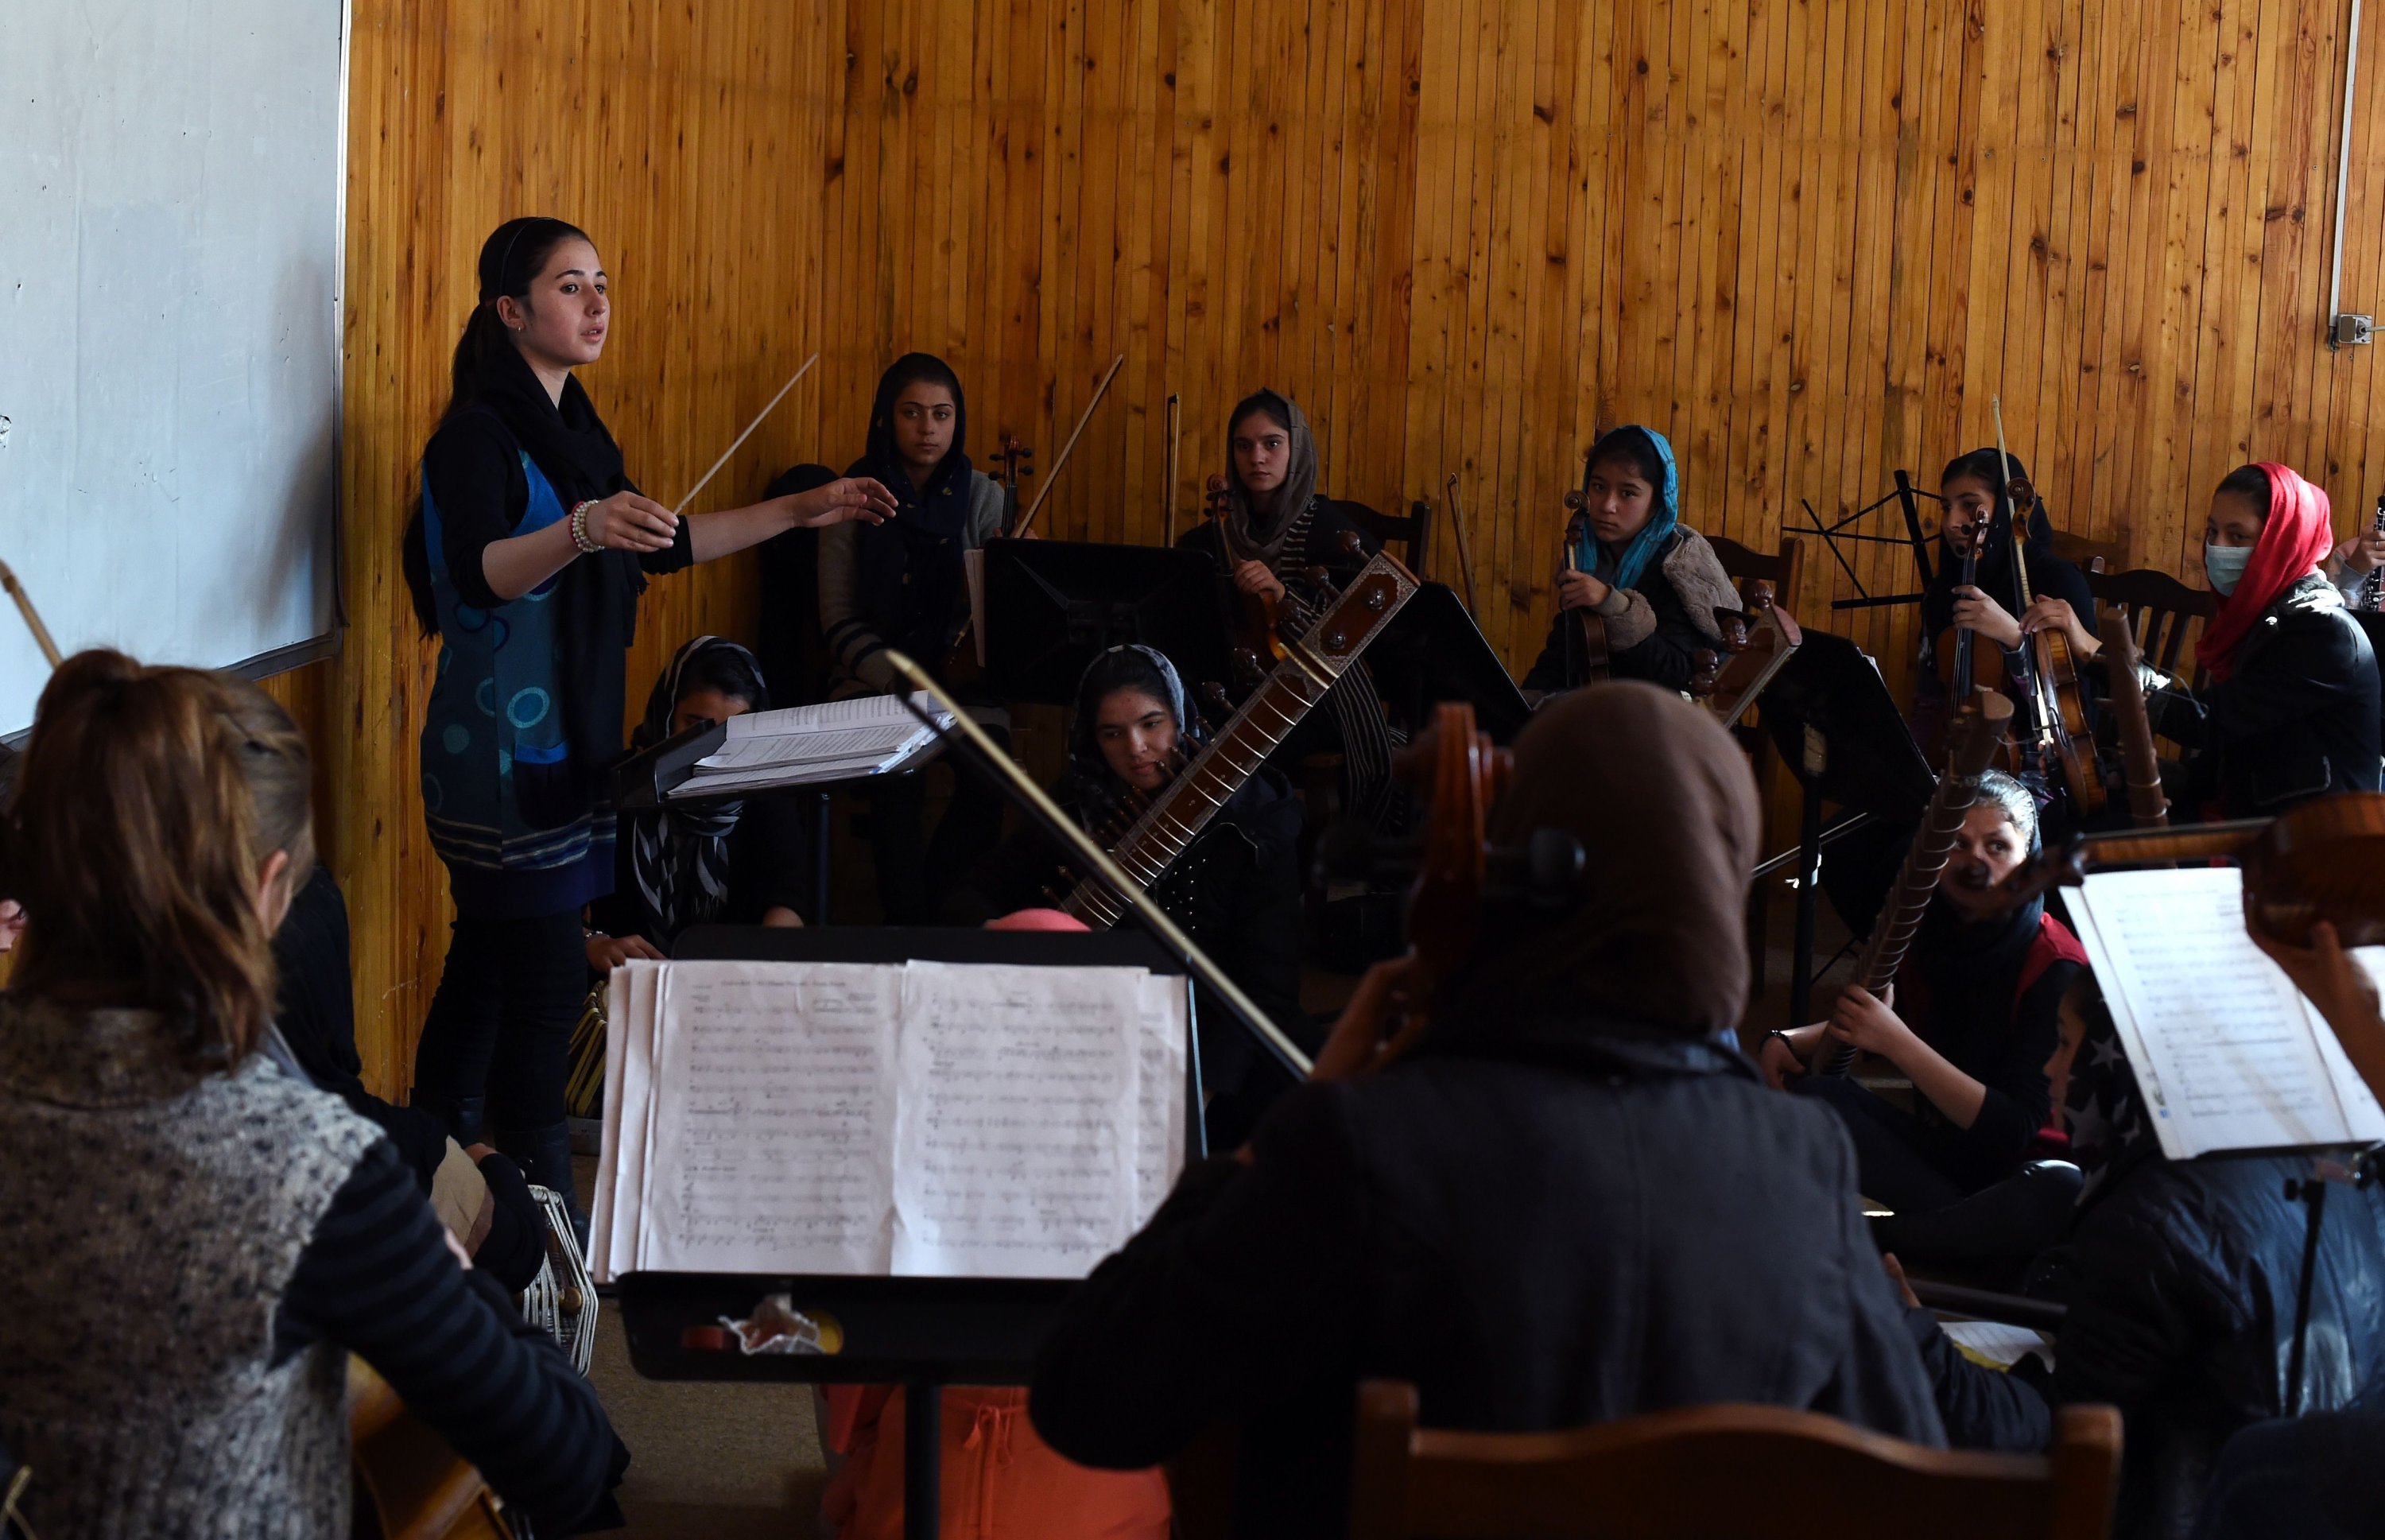 Afghan Negina Khpalwak (L), the first female orchestra conductor in Afghanistan, conducts her musicians during a rehearsal at The Afghanistan National Institute of Music, Kabul, Afghanistan, Jan. 8, 2017. (AFP PHOTO)